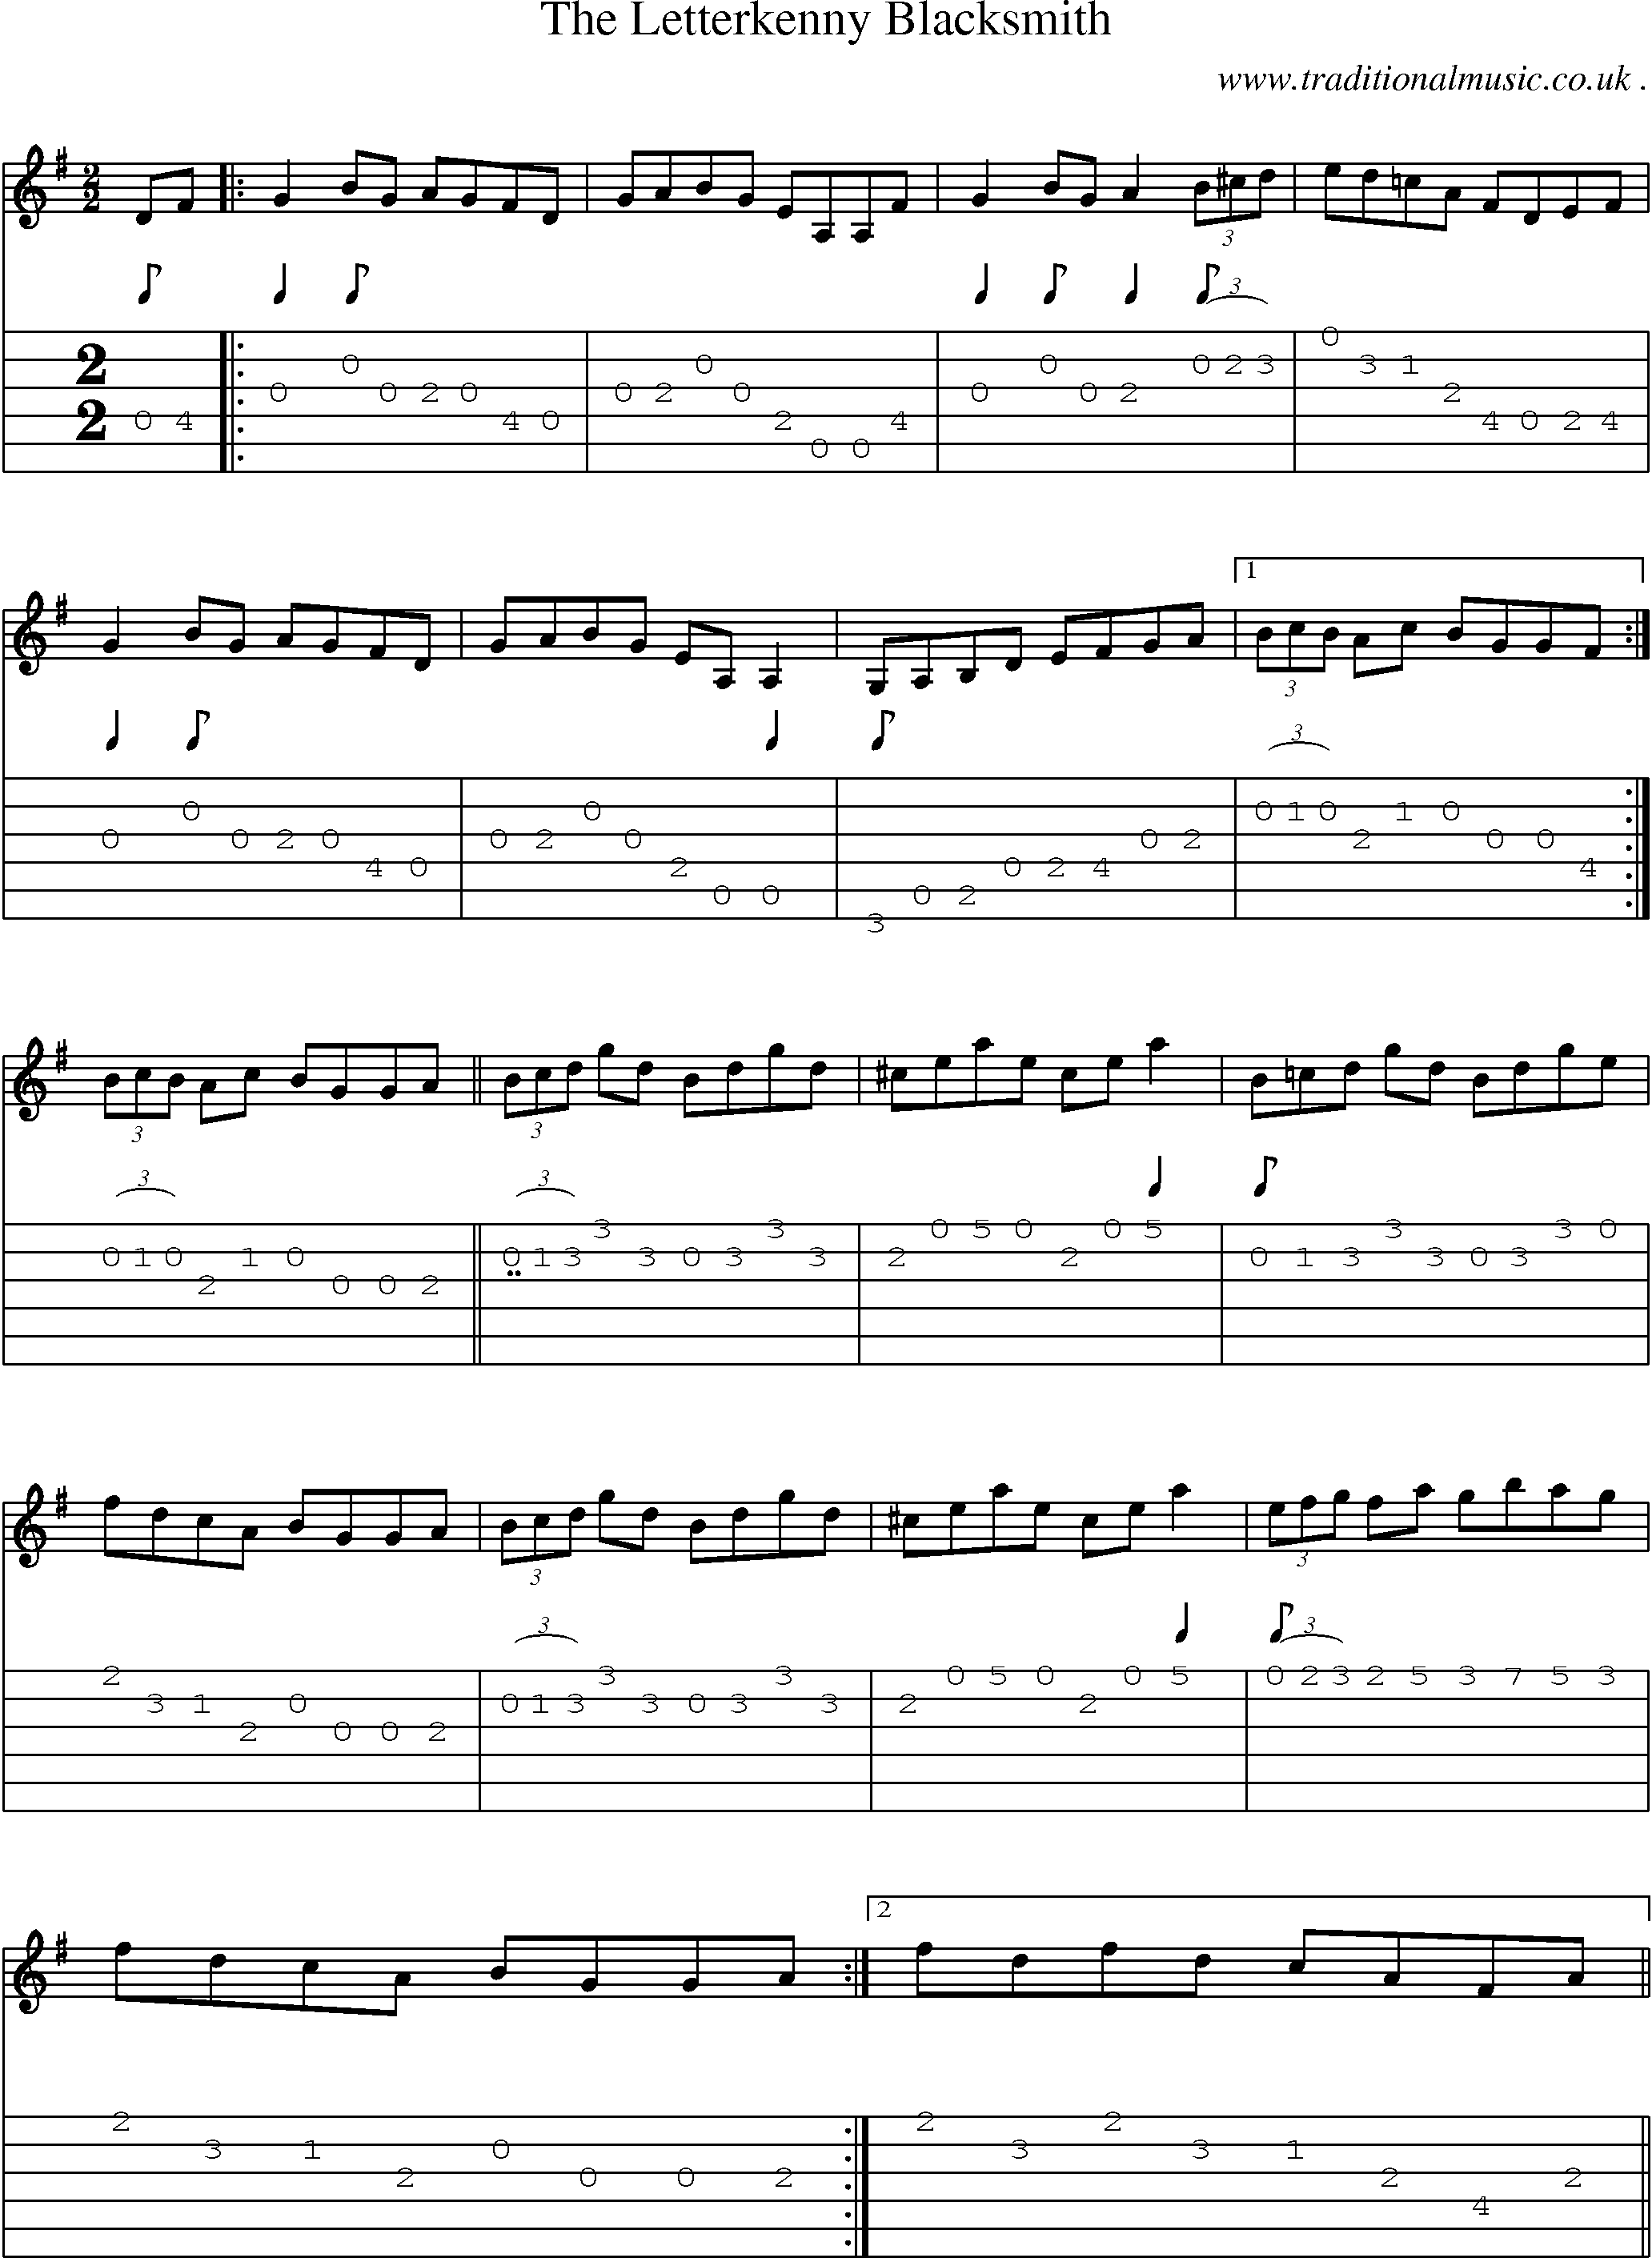 Sheet-Music and Guitar Tabs for The Letterkenny Blacksmith